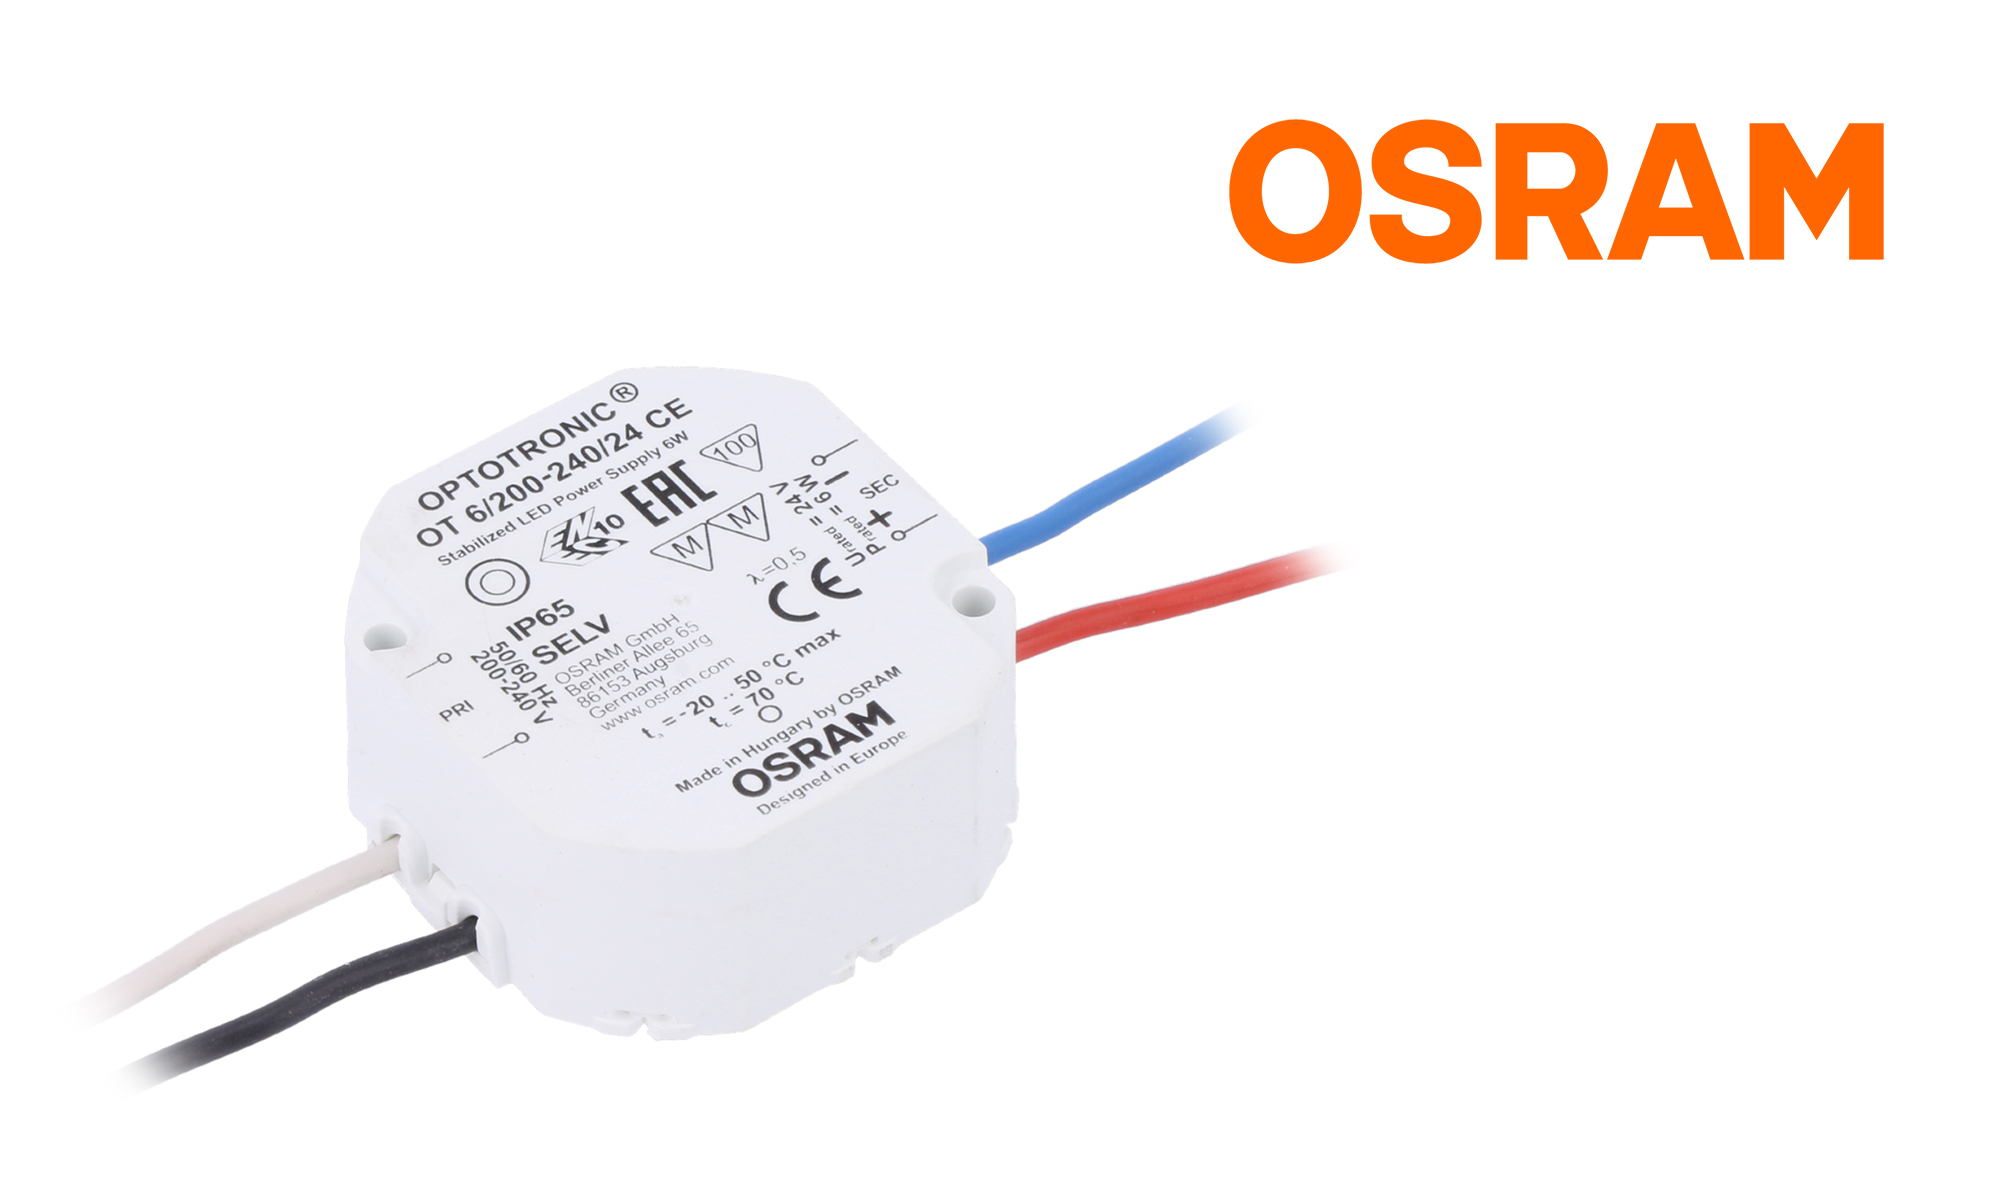 LED Power supplies from Osram